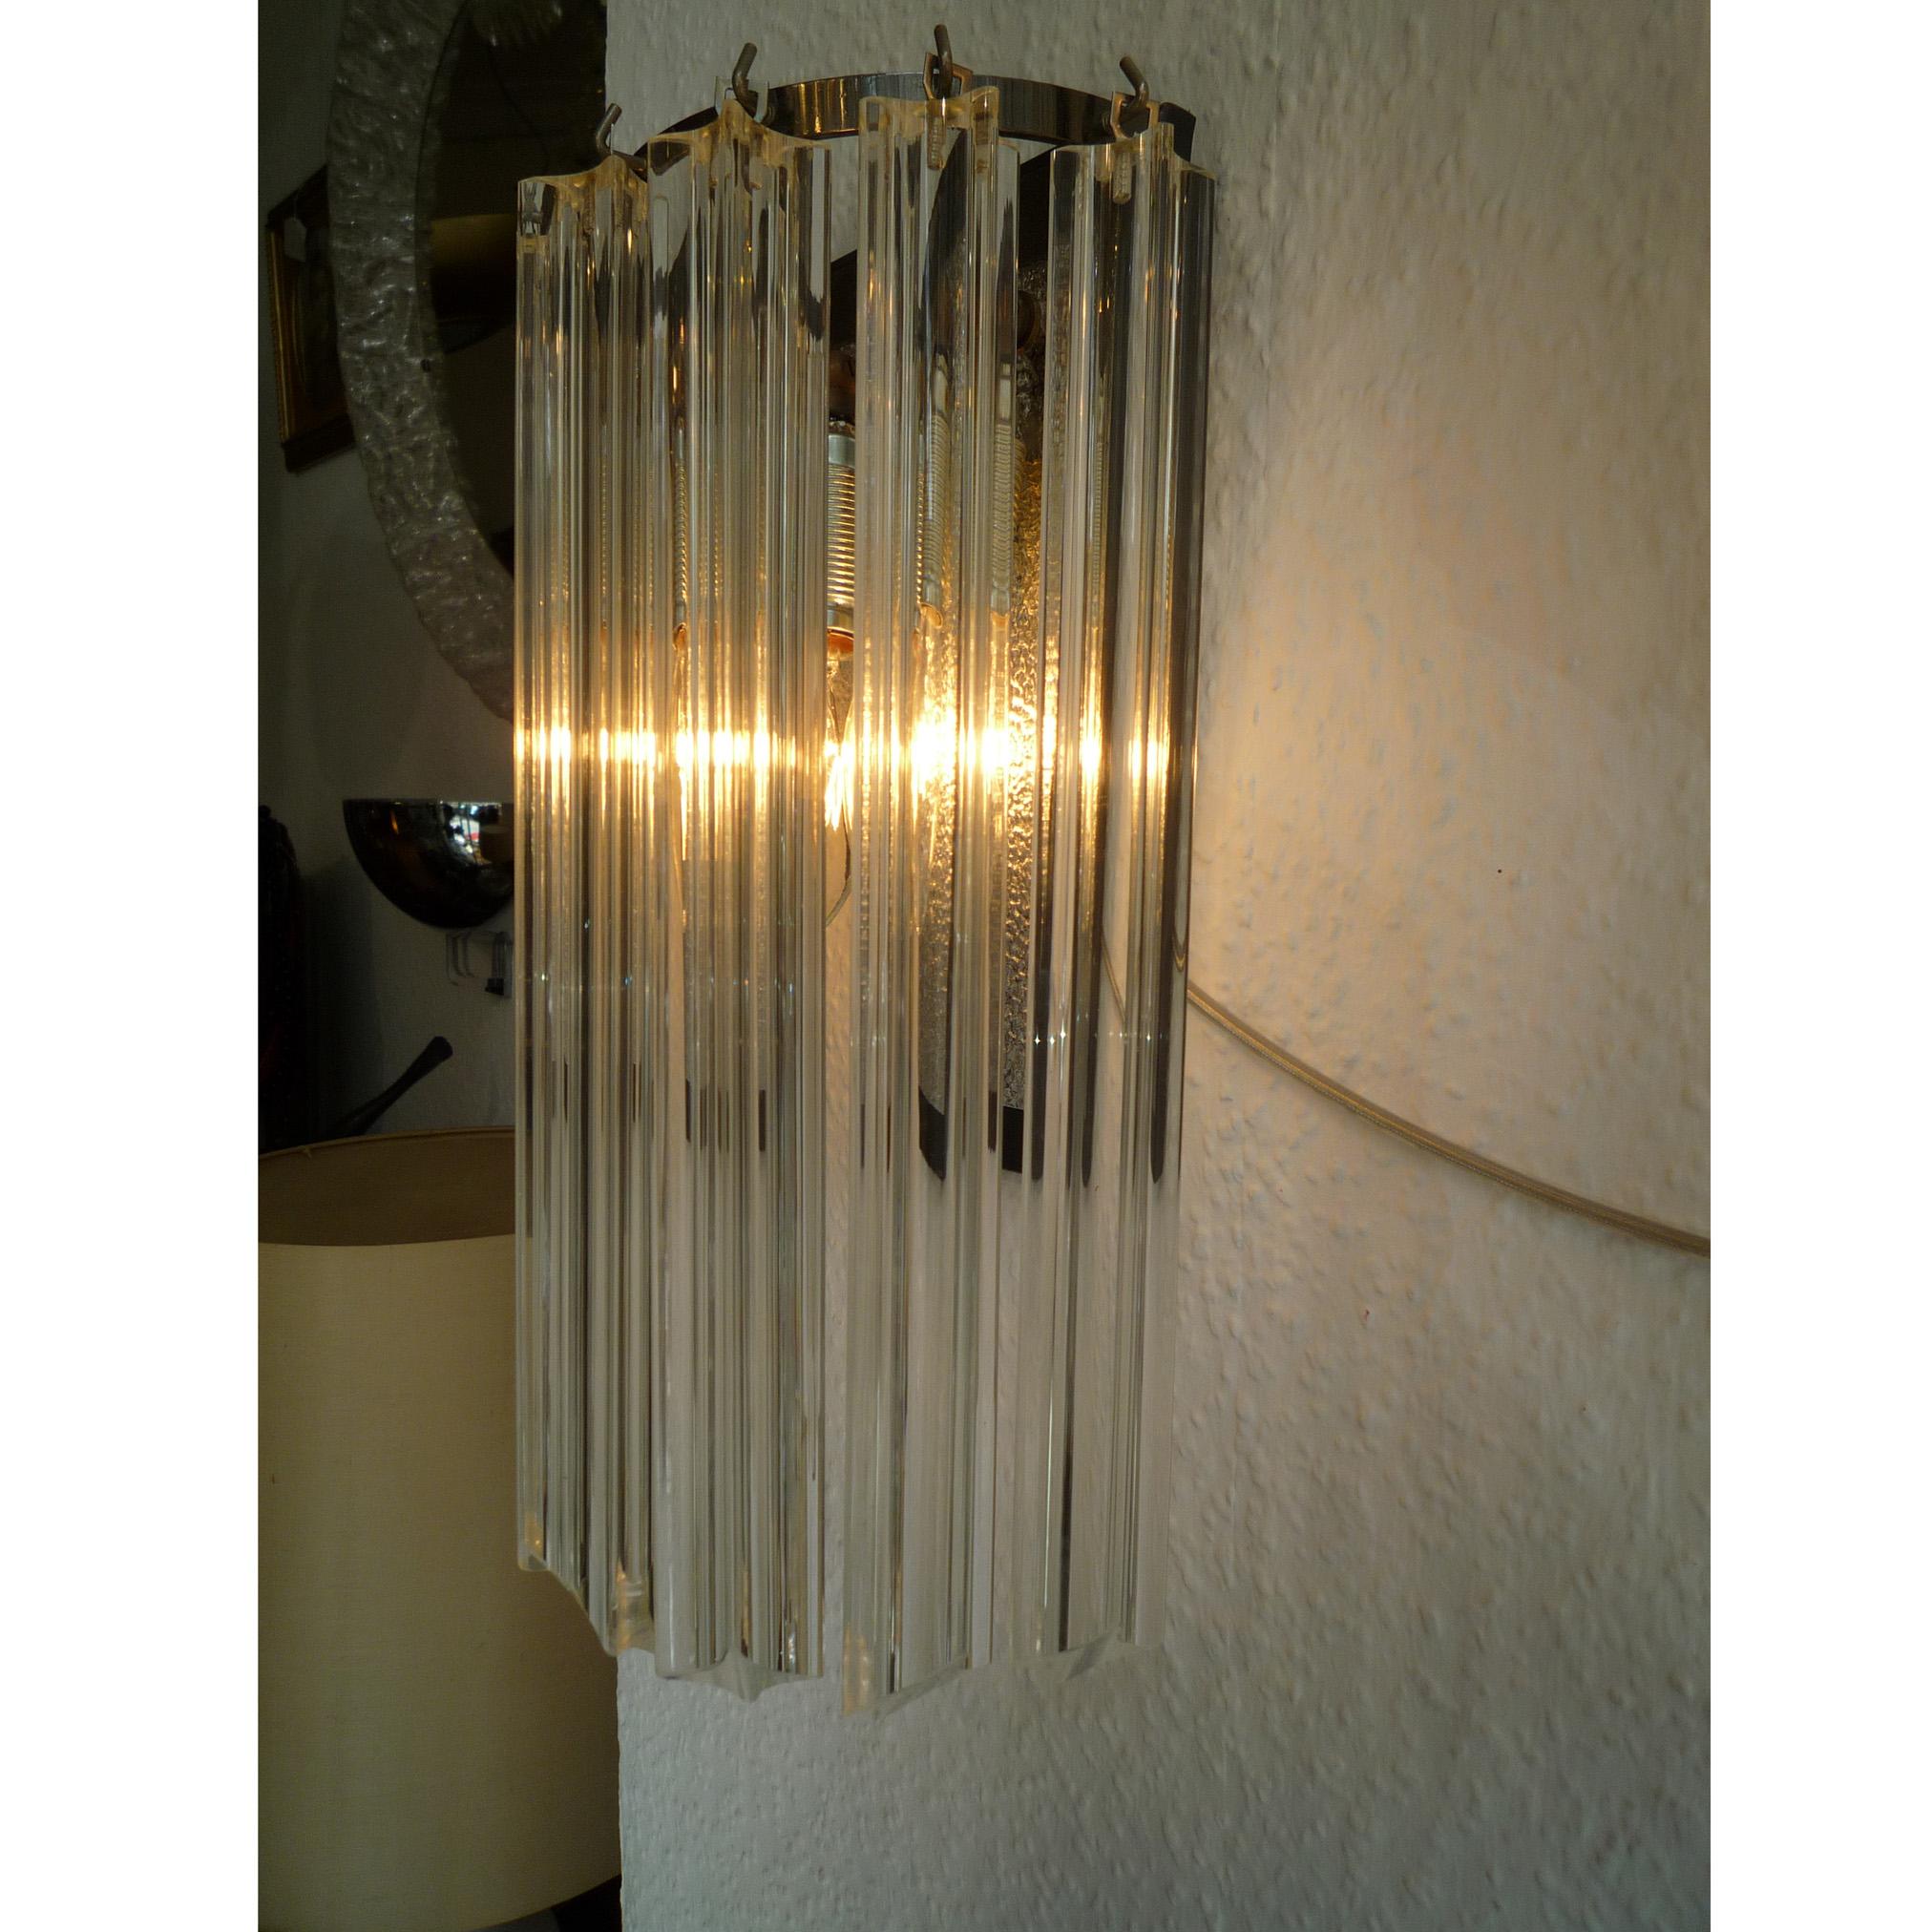 Midcentury wall lamp Italy 1960s small.

Classic wall lamp of the mid-20th century in the Venini style with Triedri crystal rods. The crystal of the wall lamp elegantly refracts the light of the two burners and gives a very pleasant